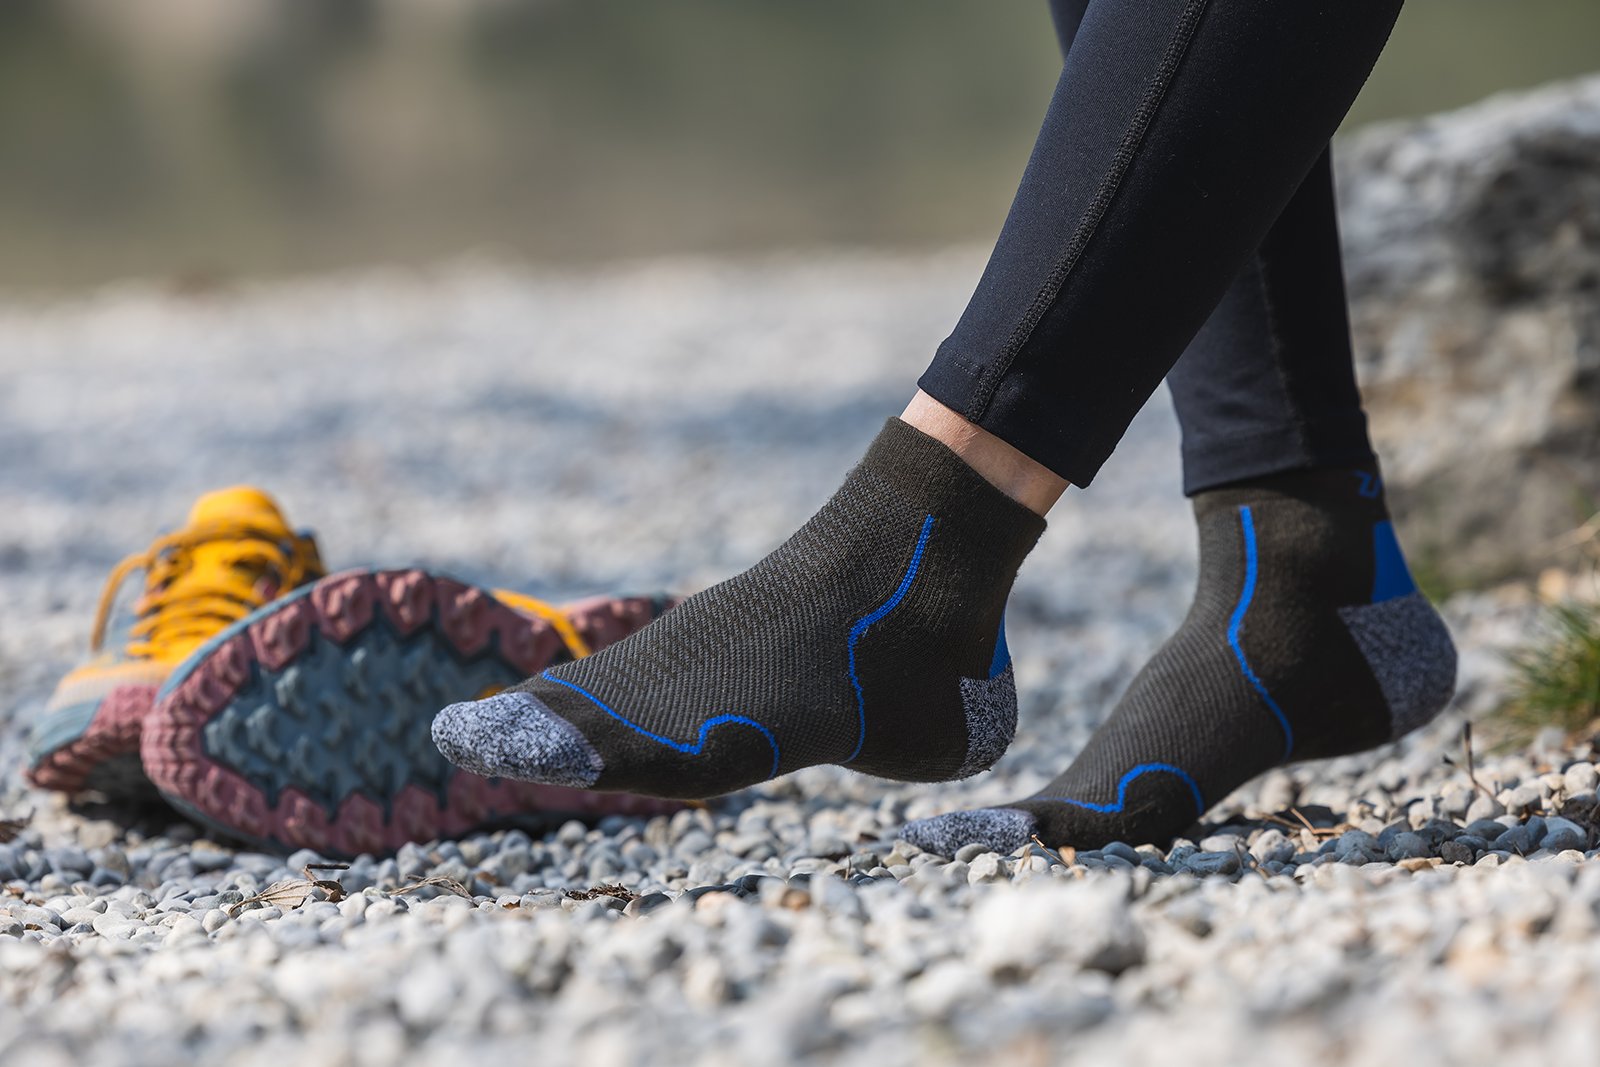 Hiking socks and their specifics: How do they differ from regular